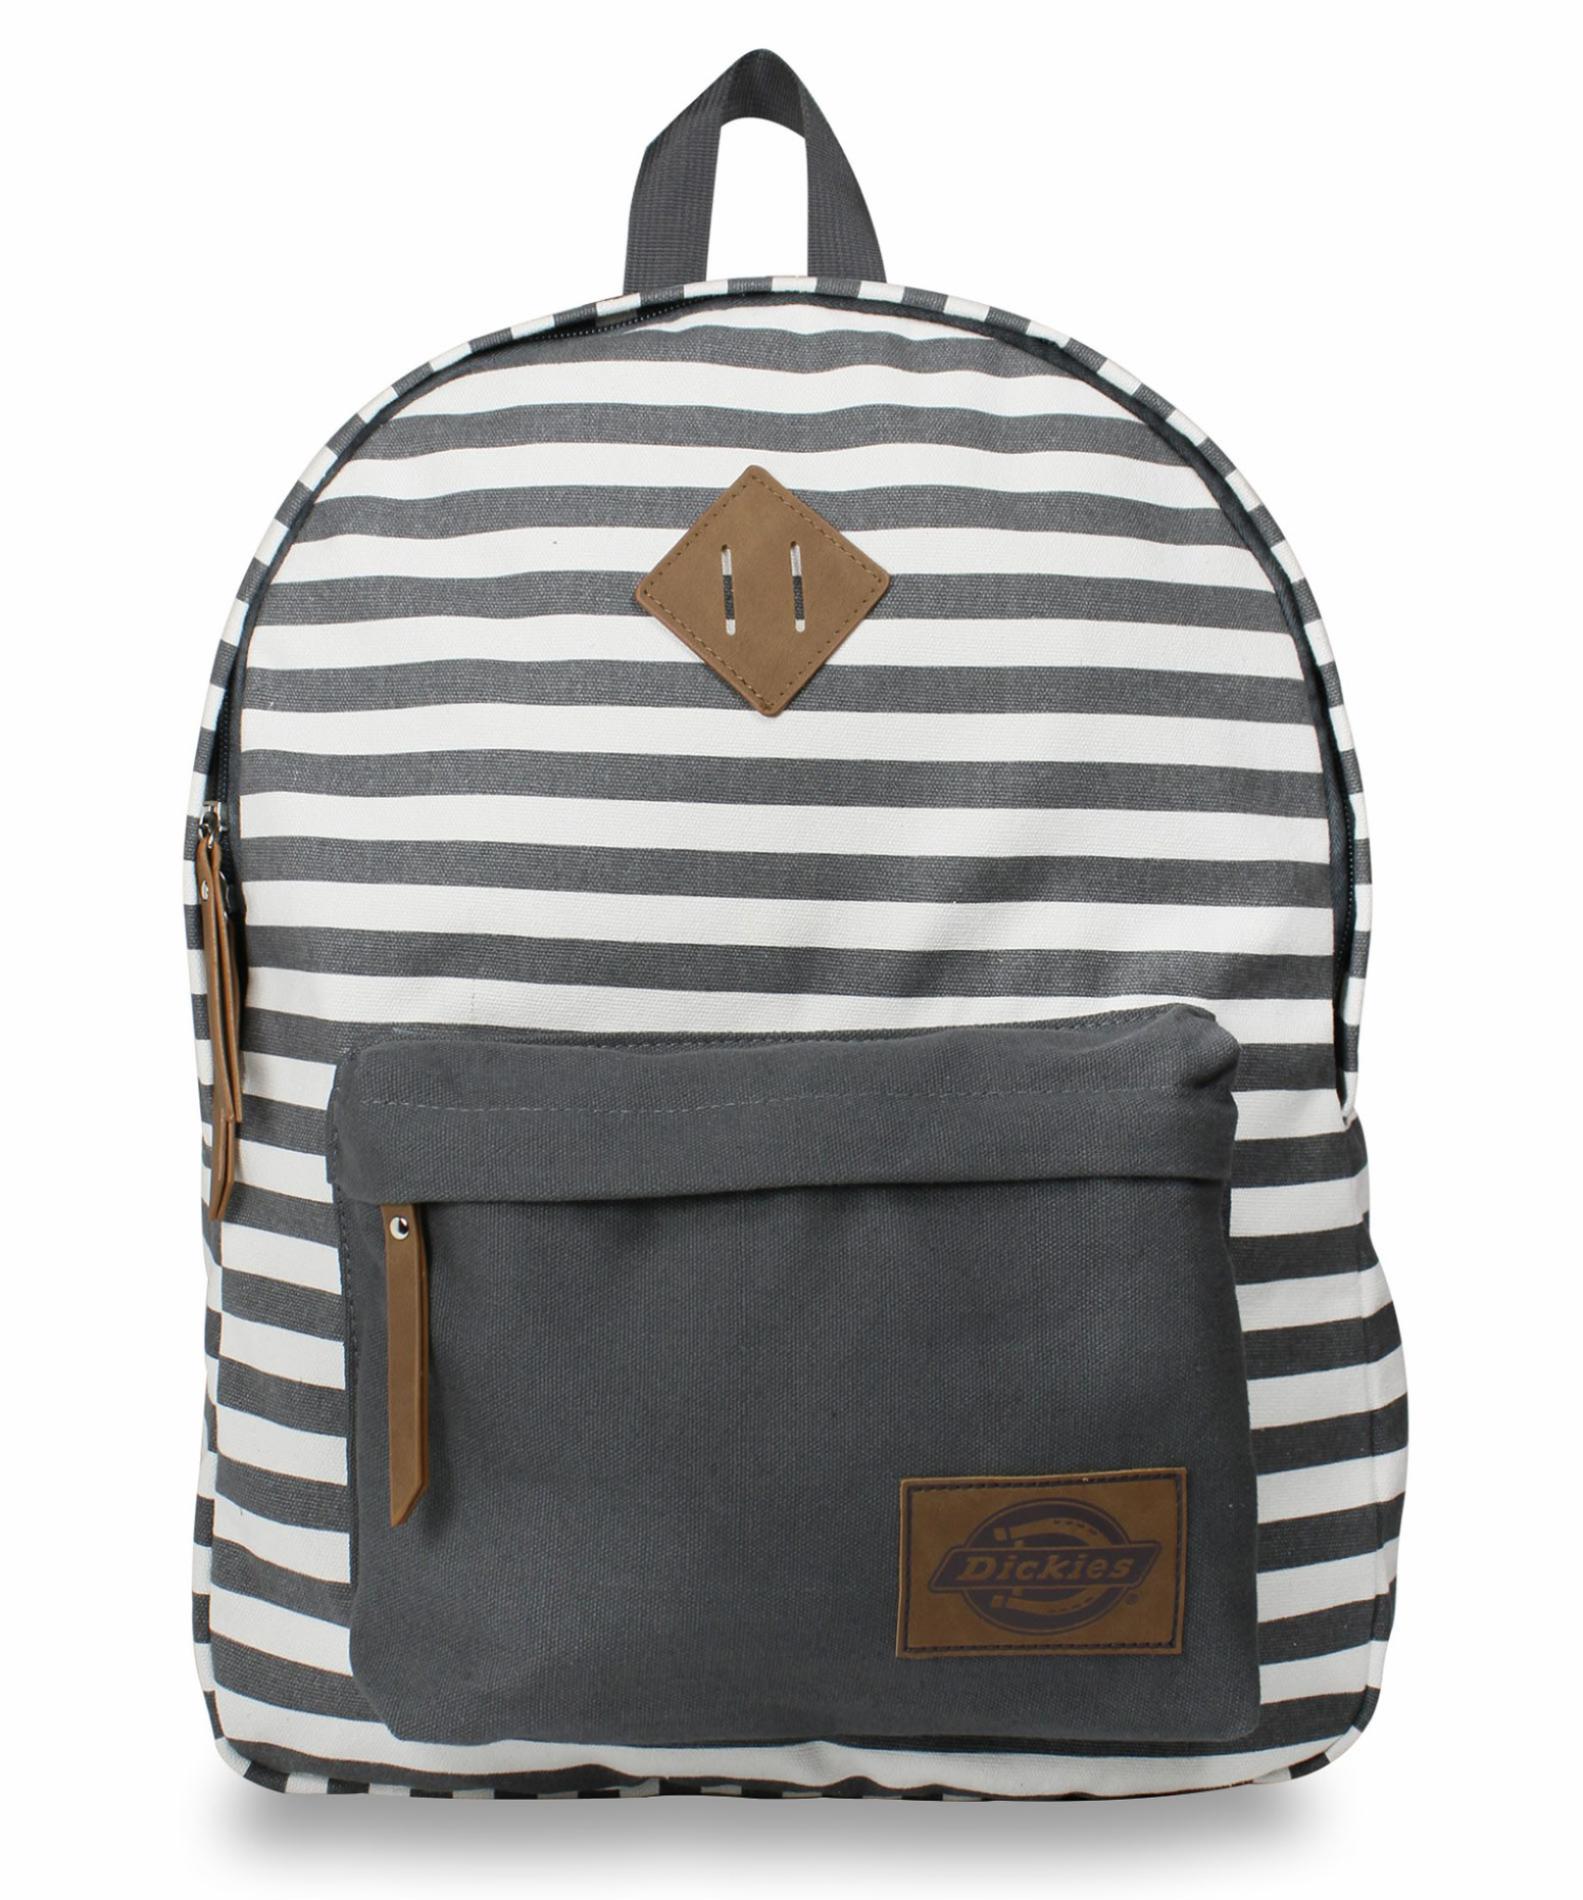 Dickies Canvas Backpack - Striped